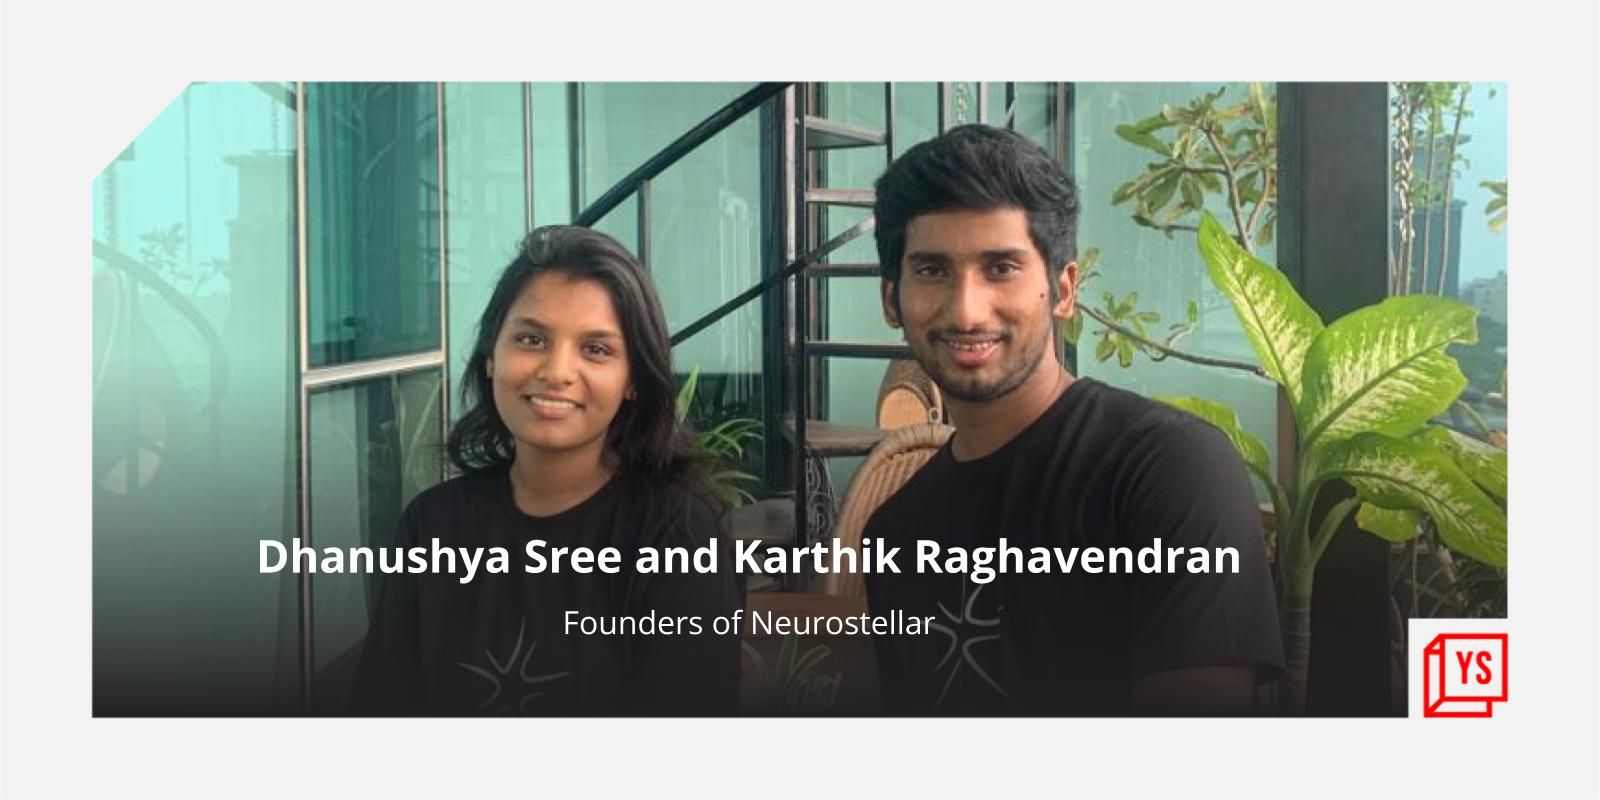 [Tech50] How this startup aims to use brain tech to solve epilepsy misdiagnosis 